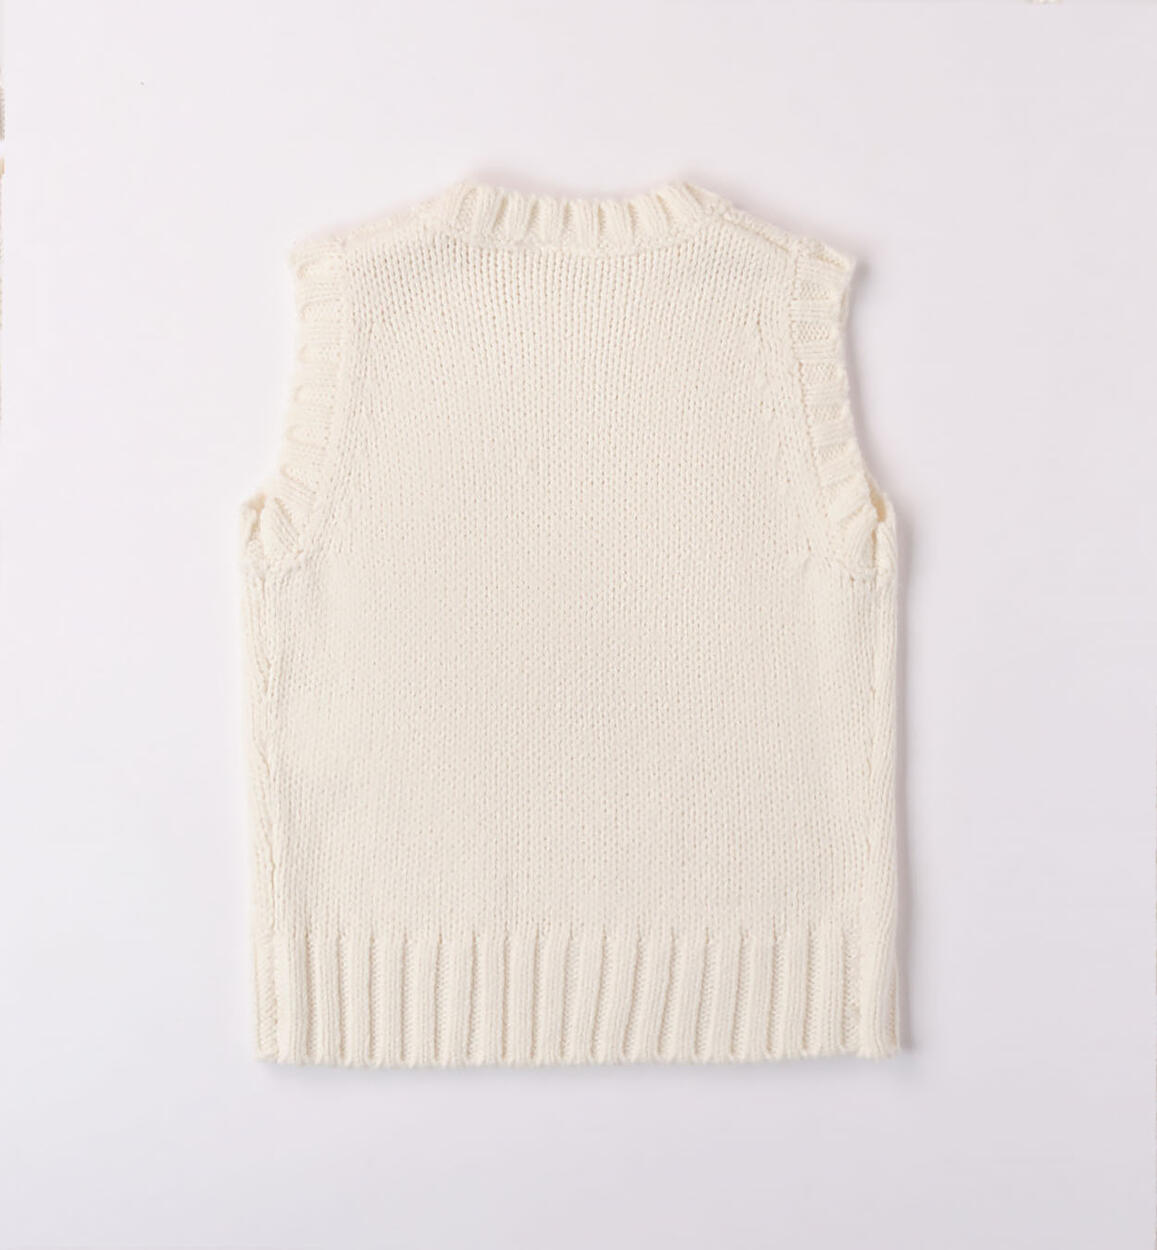 Cream Tank Top - Knit Tank Top - Knitted Top - Sweater Knit Top